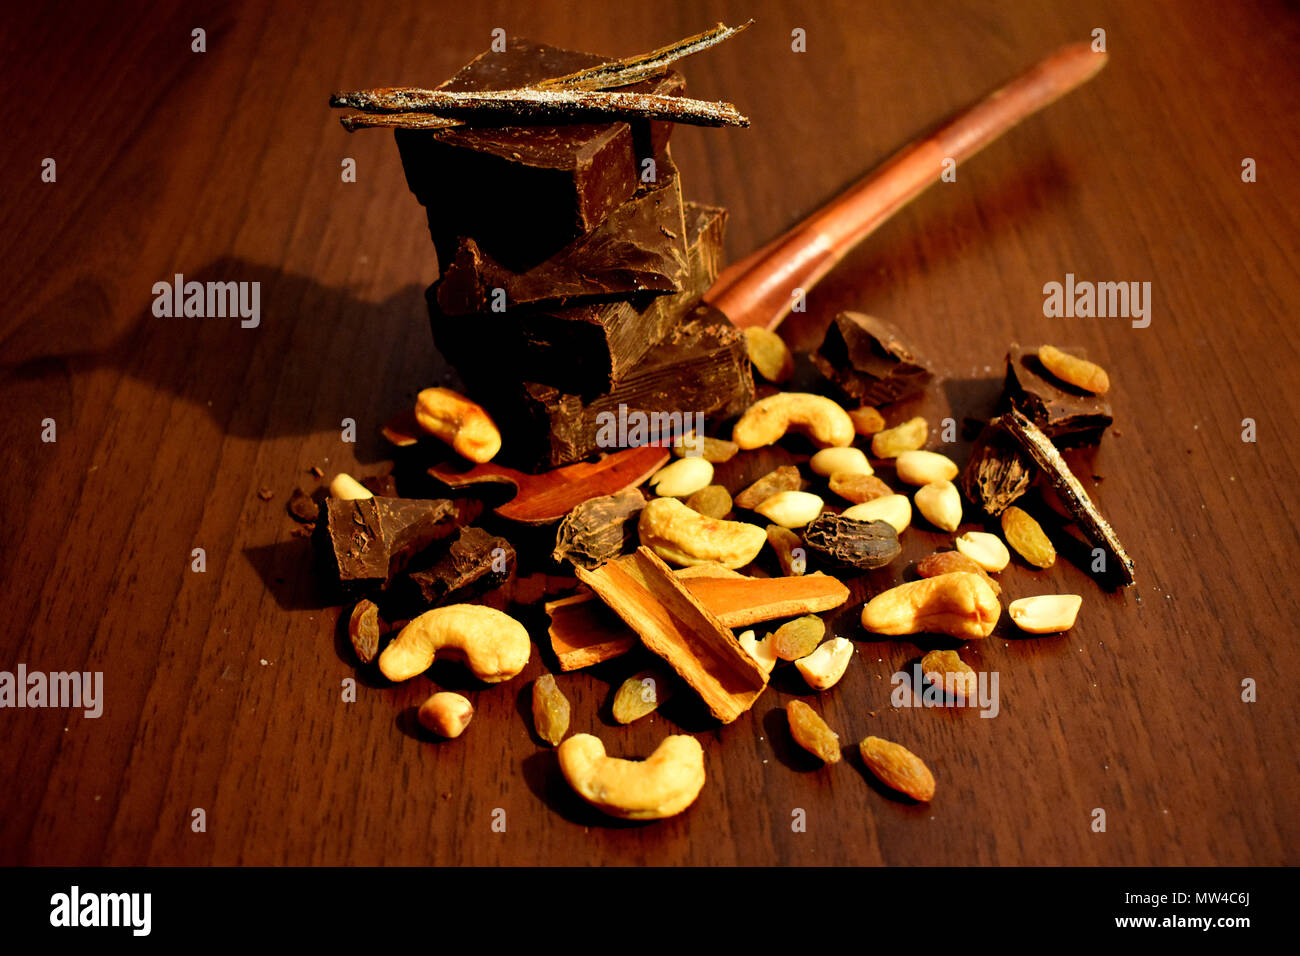 Still life with dark chocolate, sugar coated vanilla pods, nuts and spices. Stock Photo